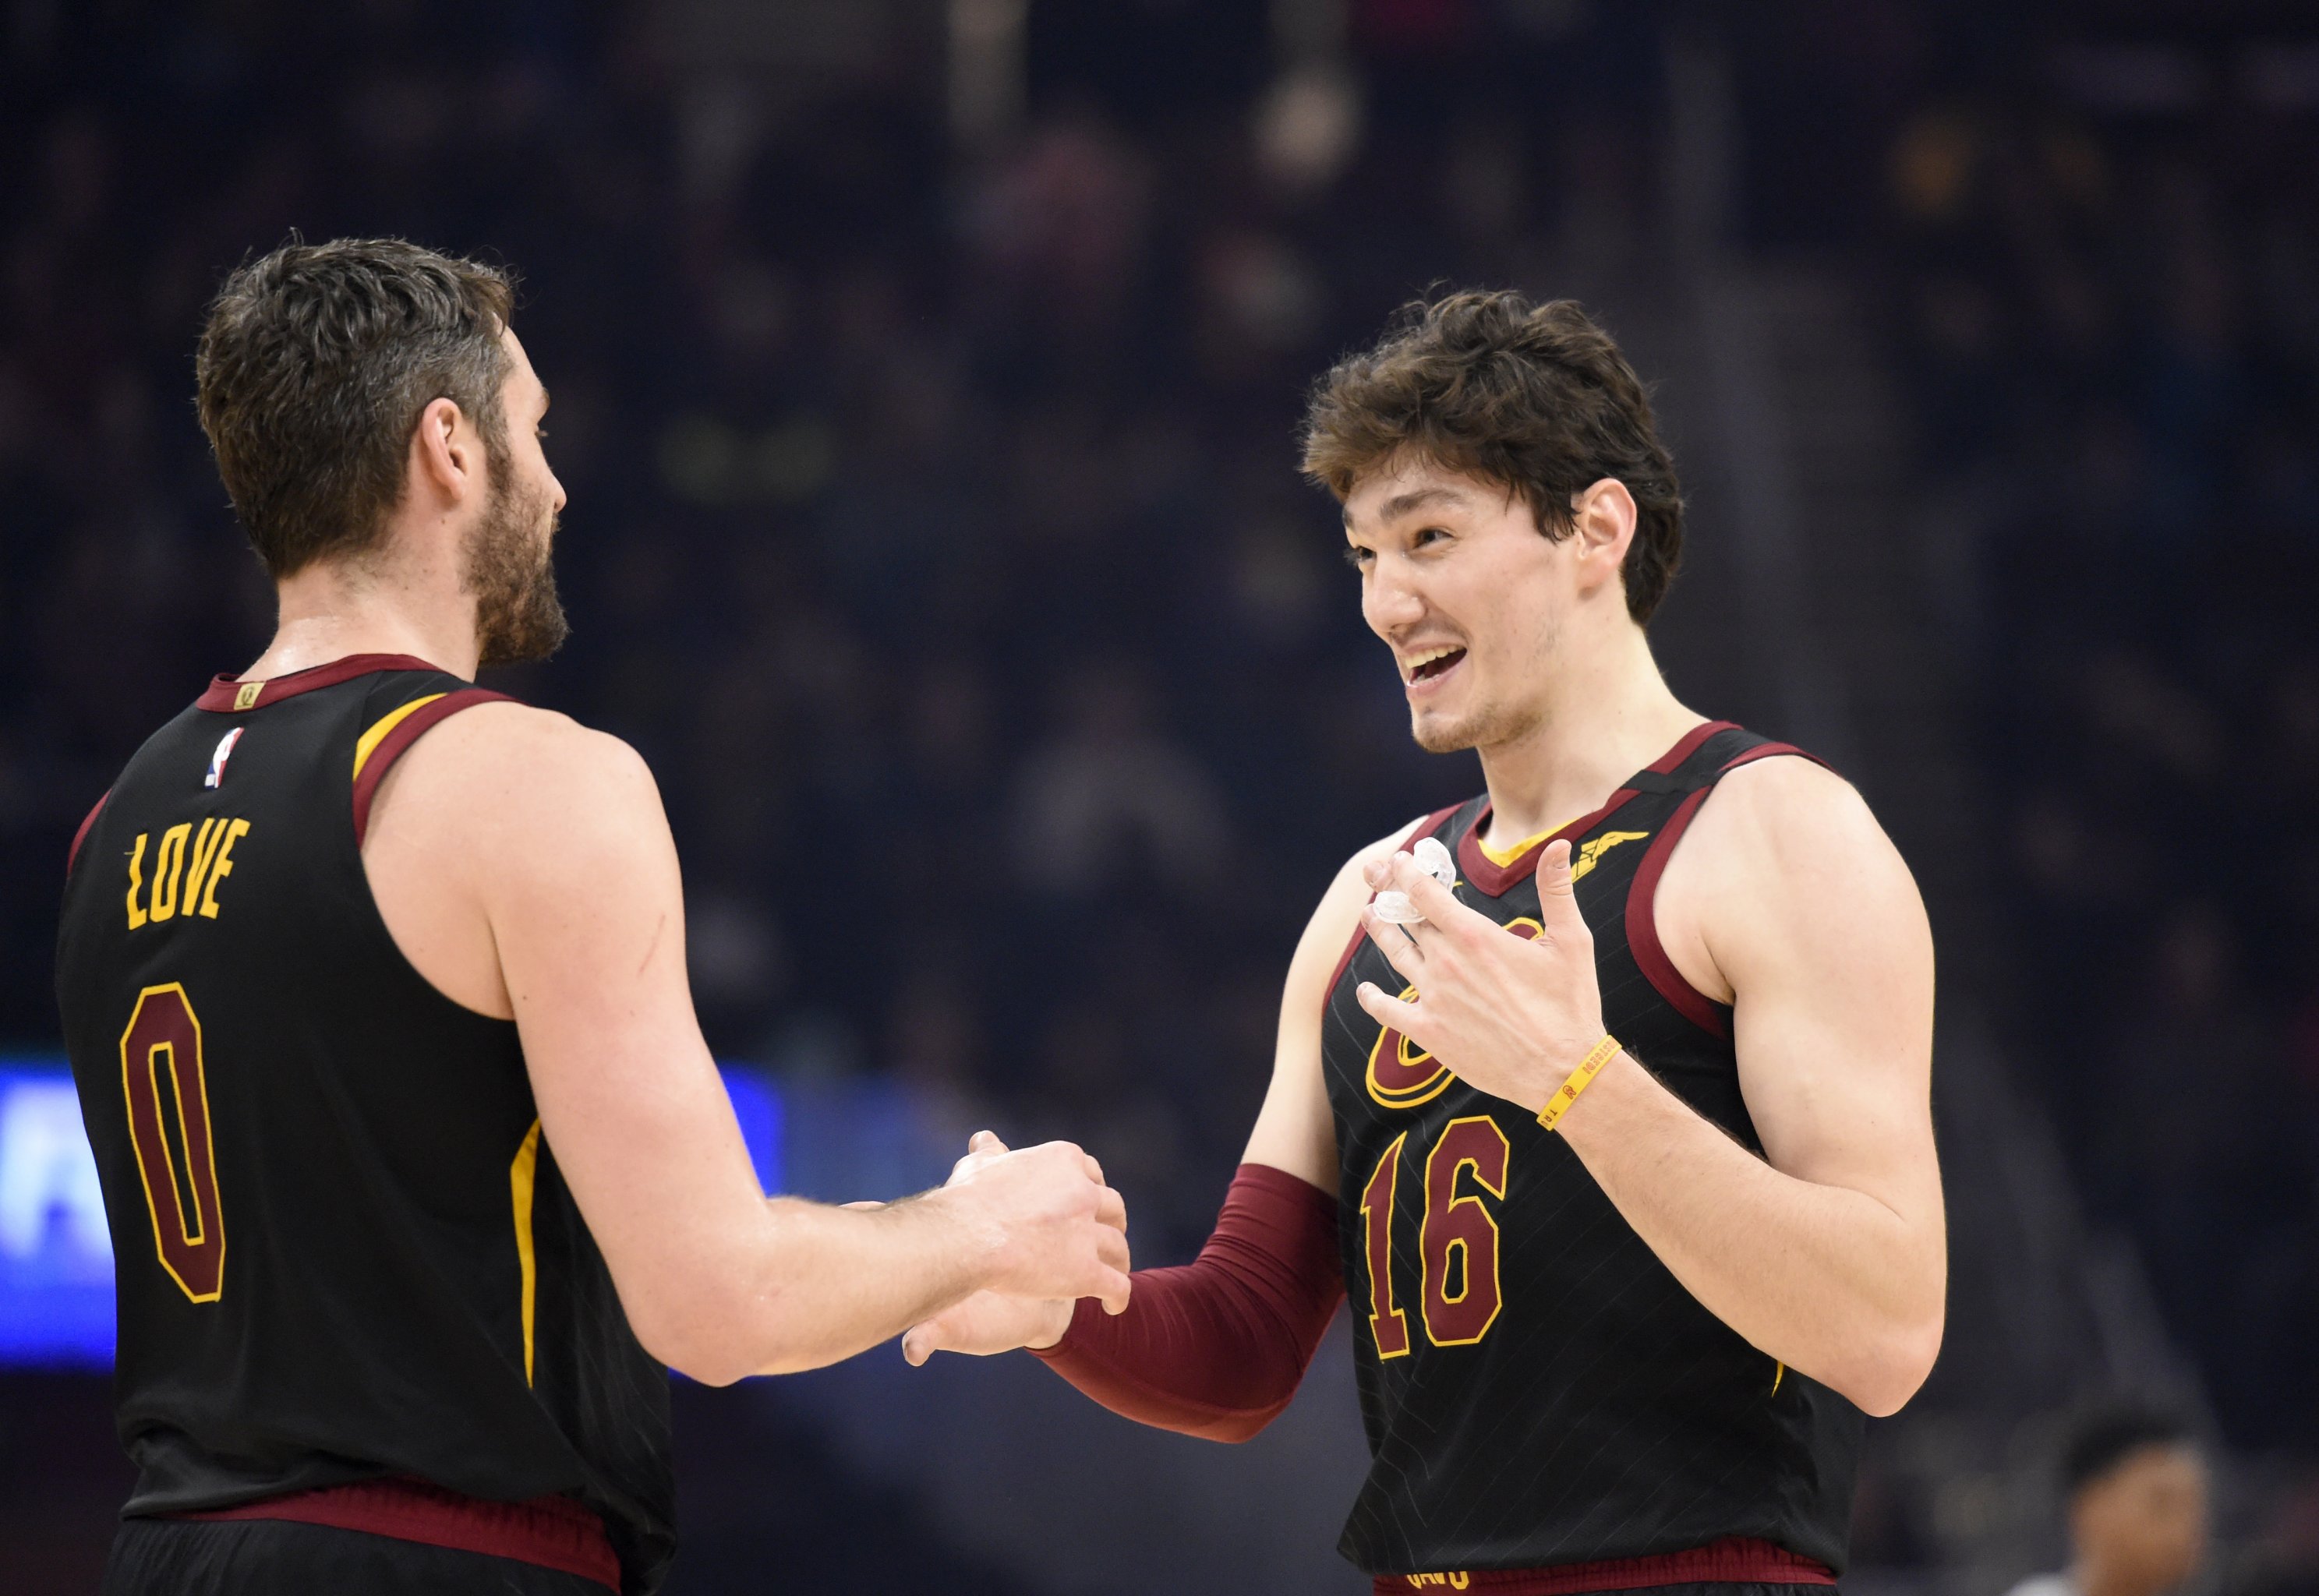 San Antonio Spurs Trade for LeBron James 'Favorite' Cedi Osman - Sports  Illustrated Inside The Spurs, Analysis and More